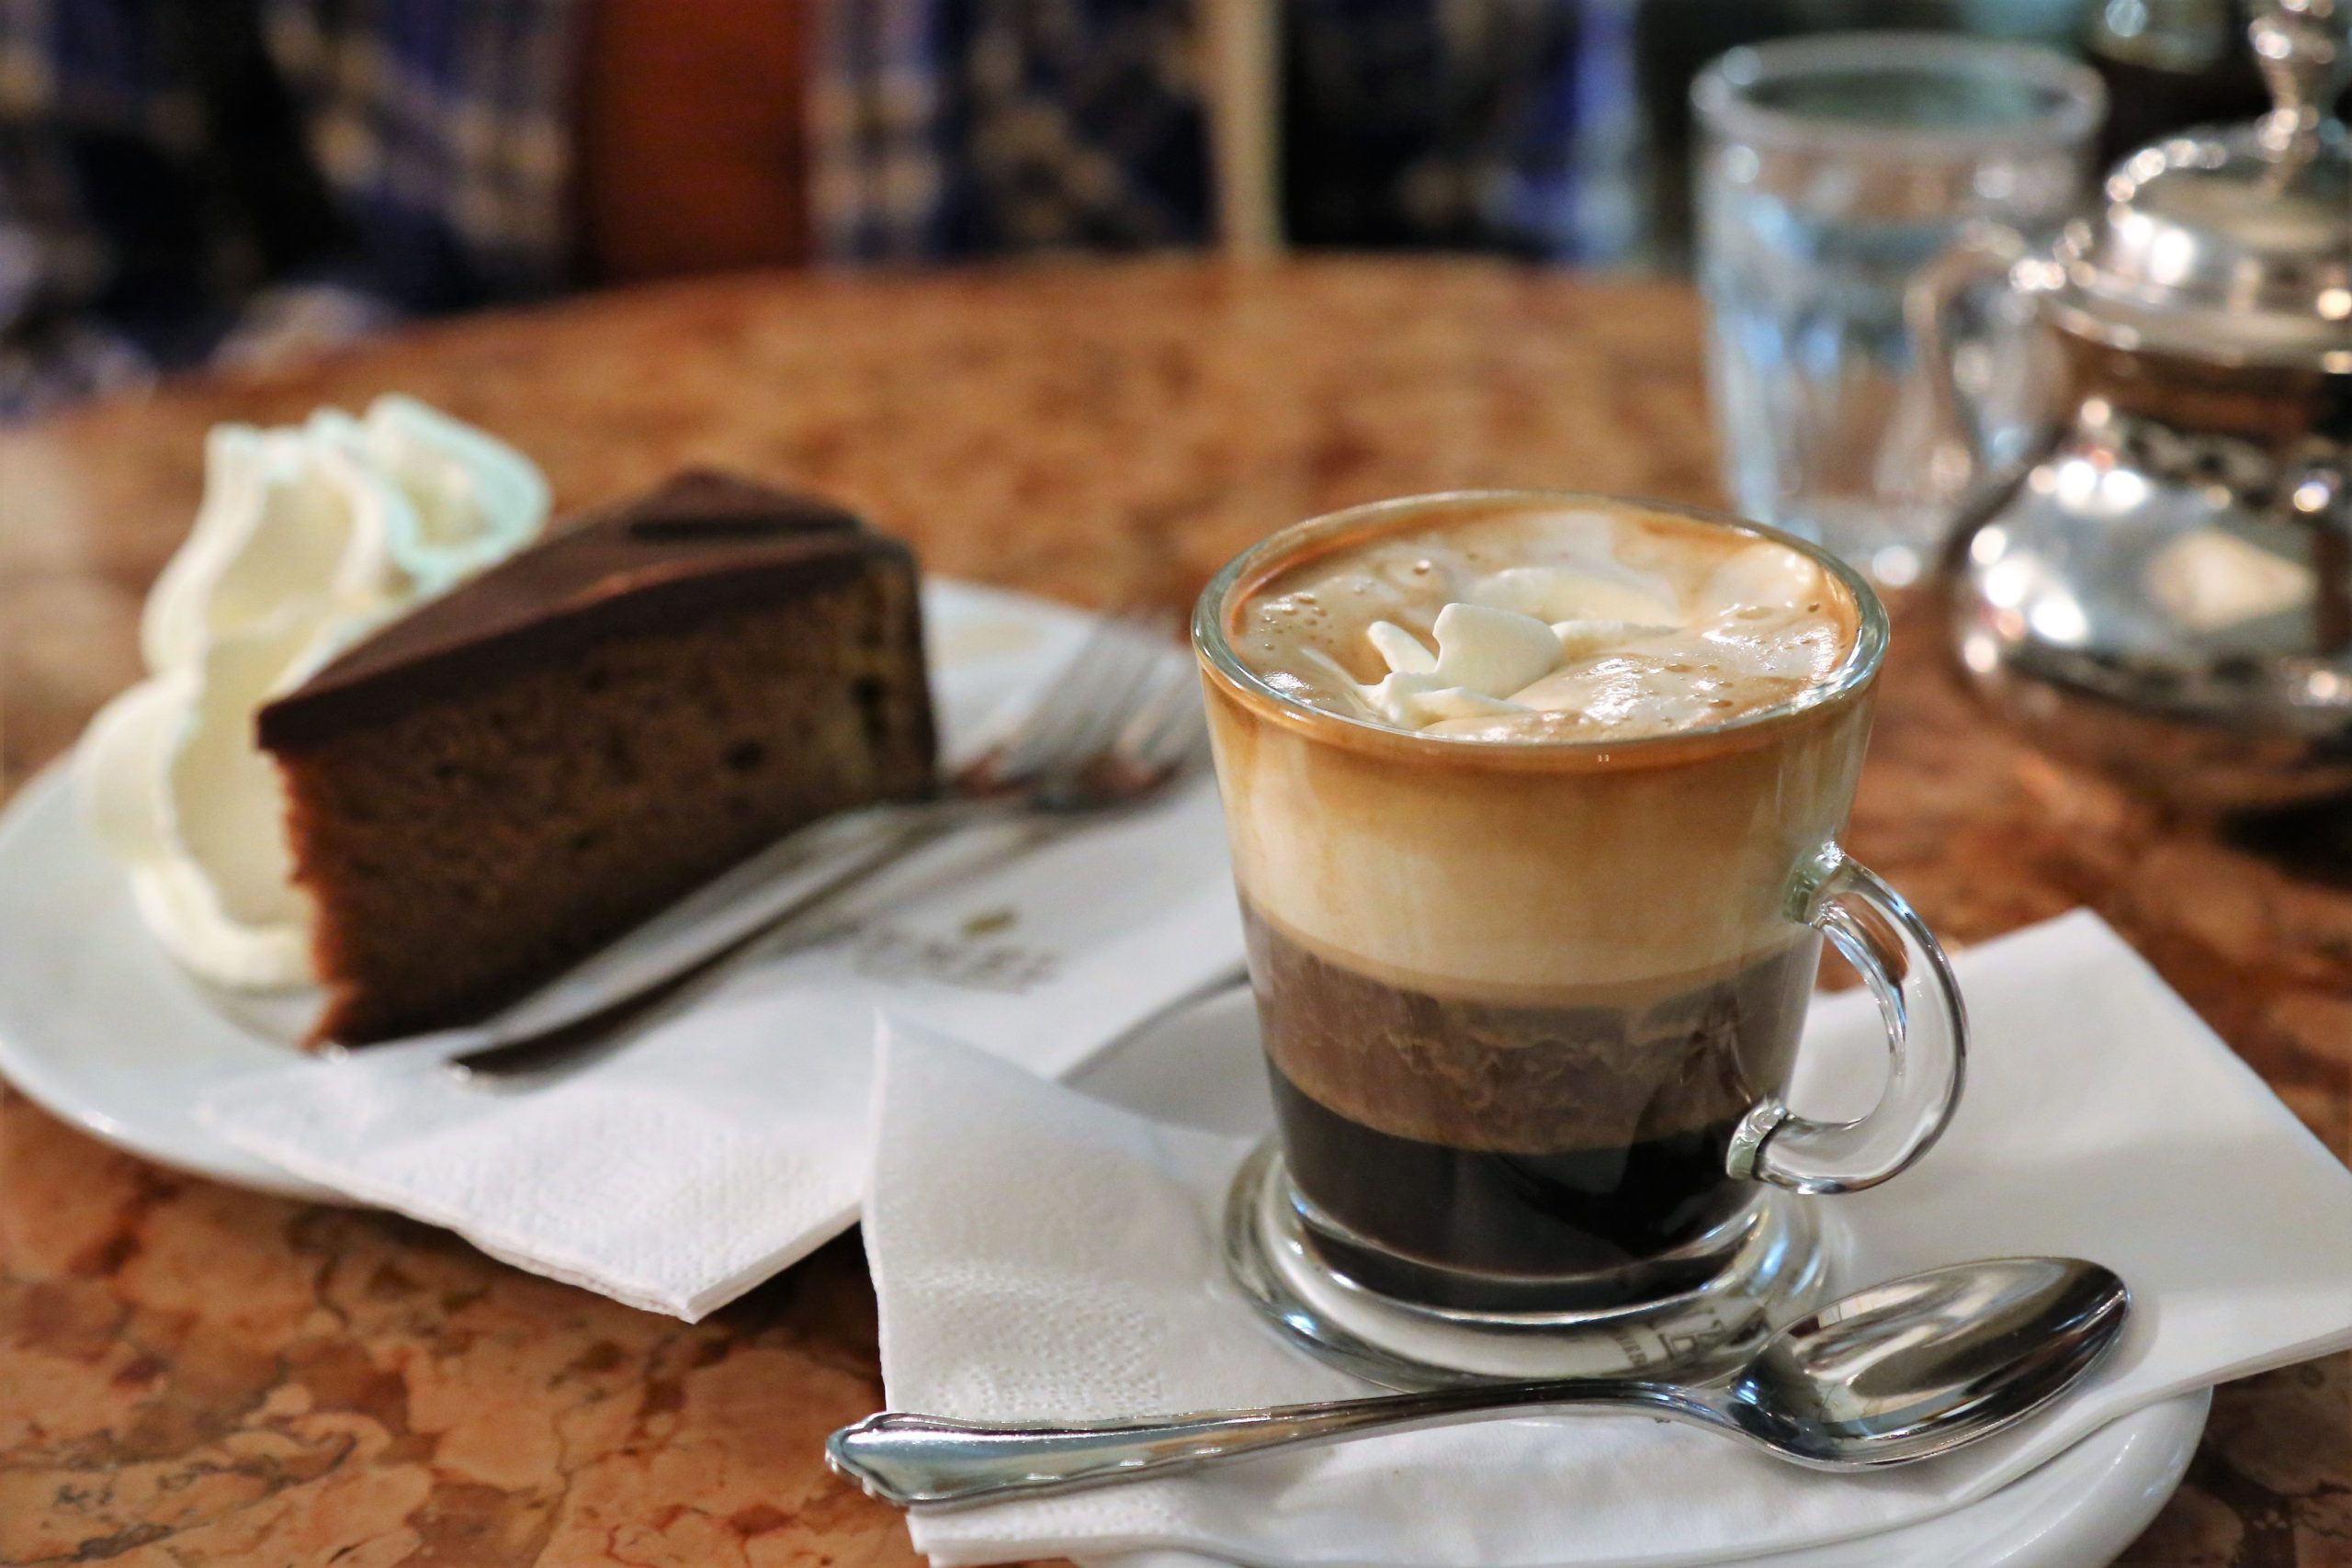 6 Best Coffee Houses and Cafes in Vienna according to locals